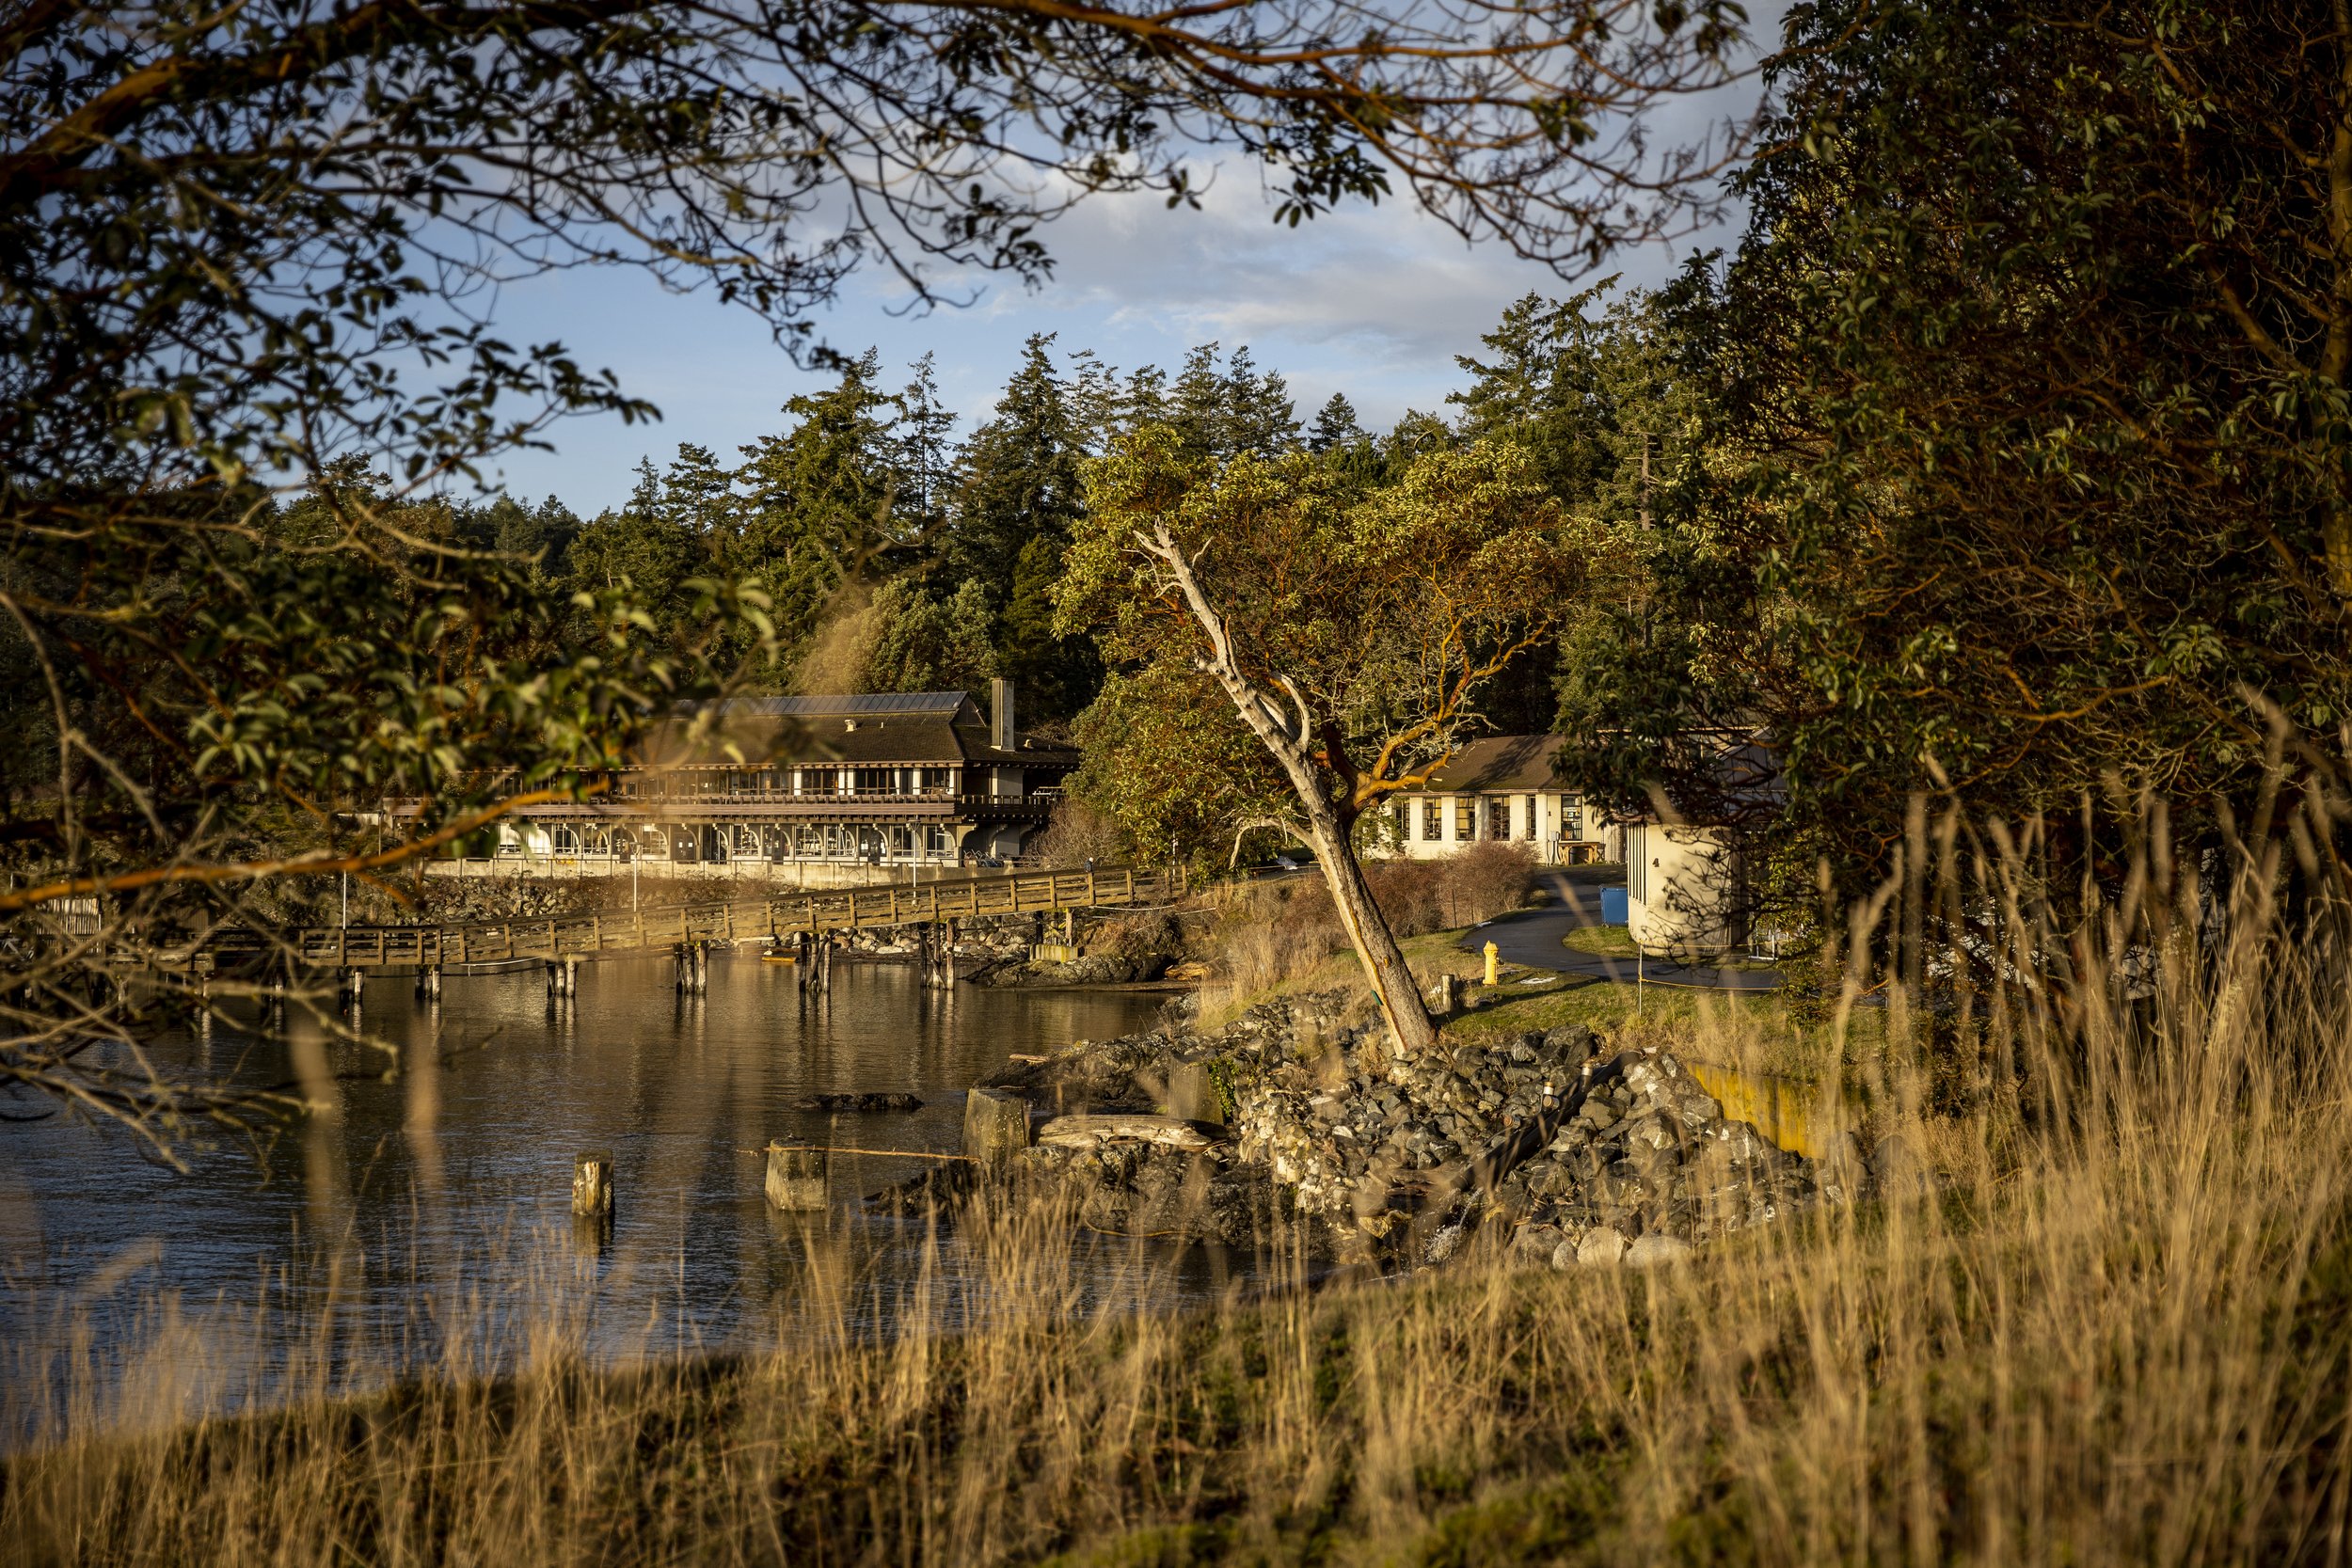   Friday Harbor Laboratories, located on San Juan Island, is the location of the first sunflower sea star captive rearing program, a collaboration between the University of Washington and The Nature Conservancy. // Dennis Wise - University of Washing